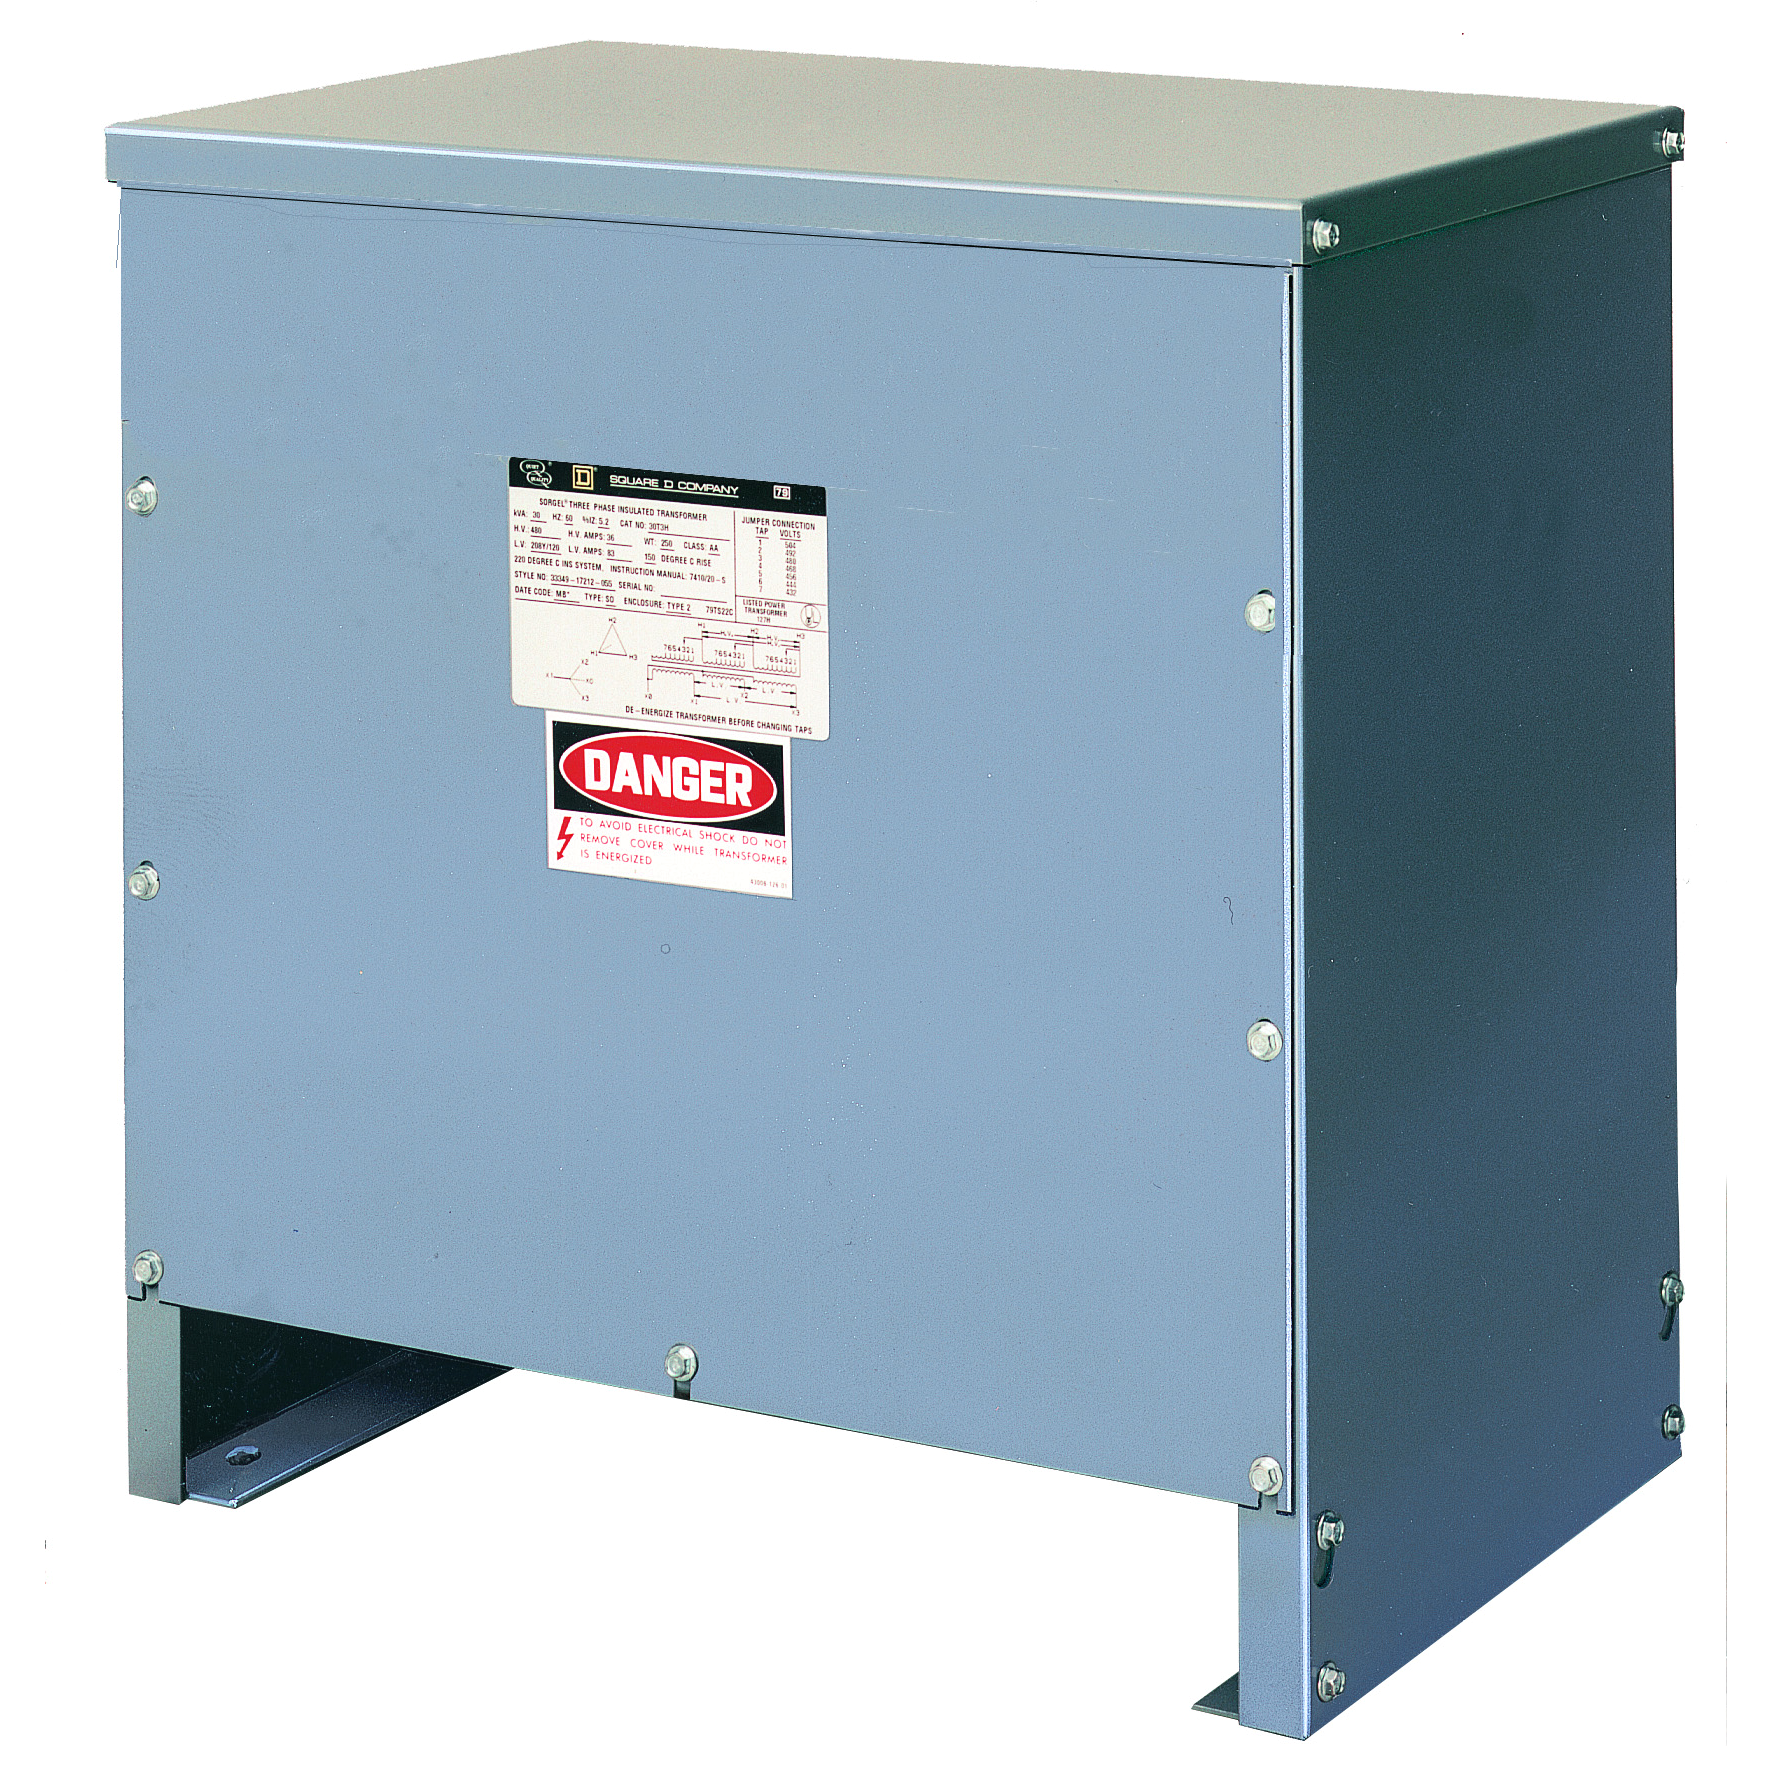 Low voltage transformer, non ventilated dry type, 3 phase, 75kVA, 240x480V primary, 120/240V secondary, Type 3R